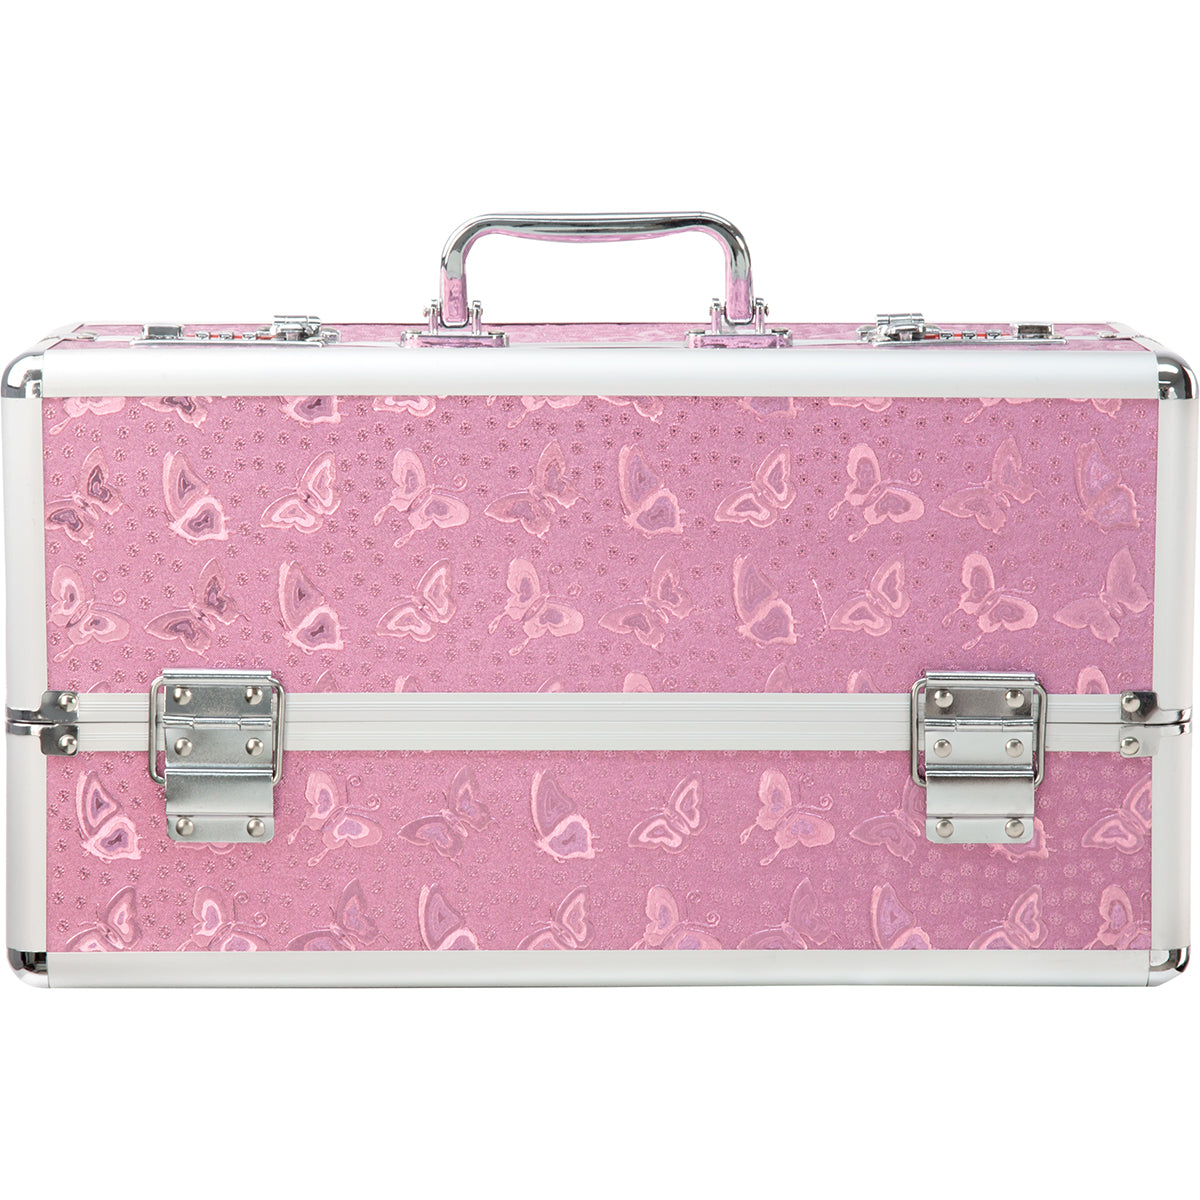 Lockable Toy Box Large - Pink